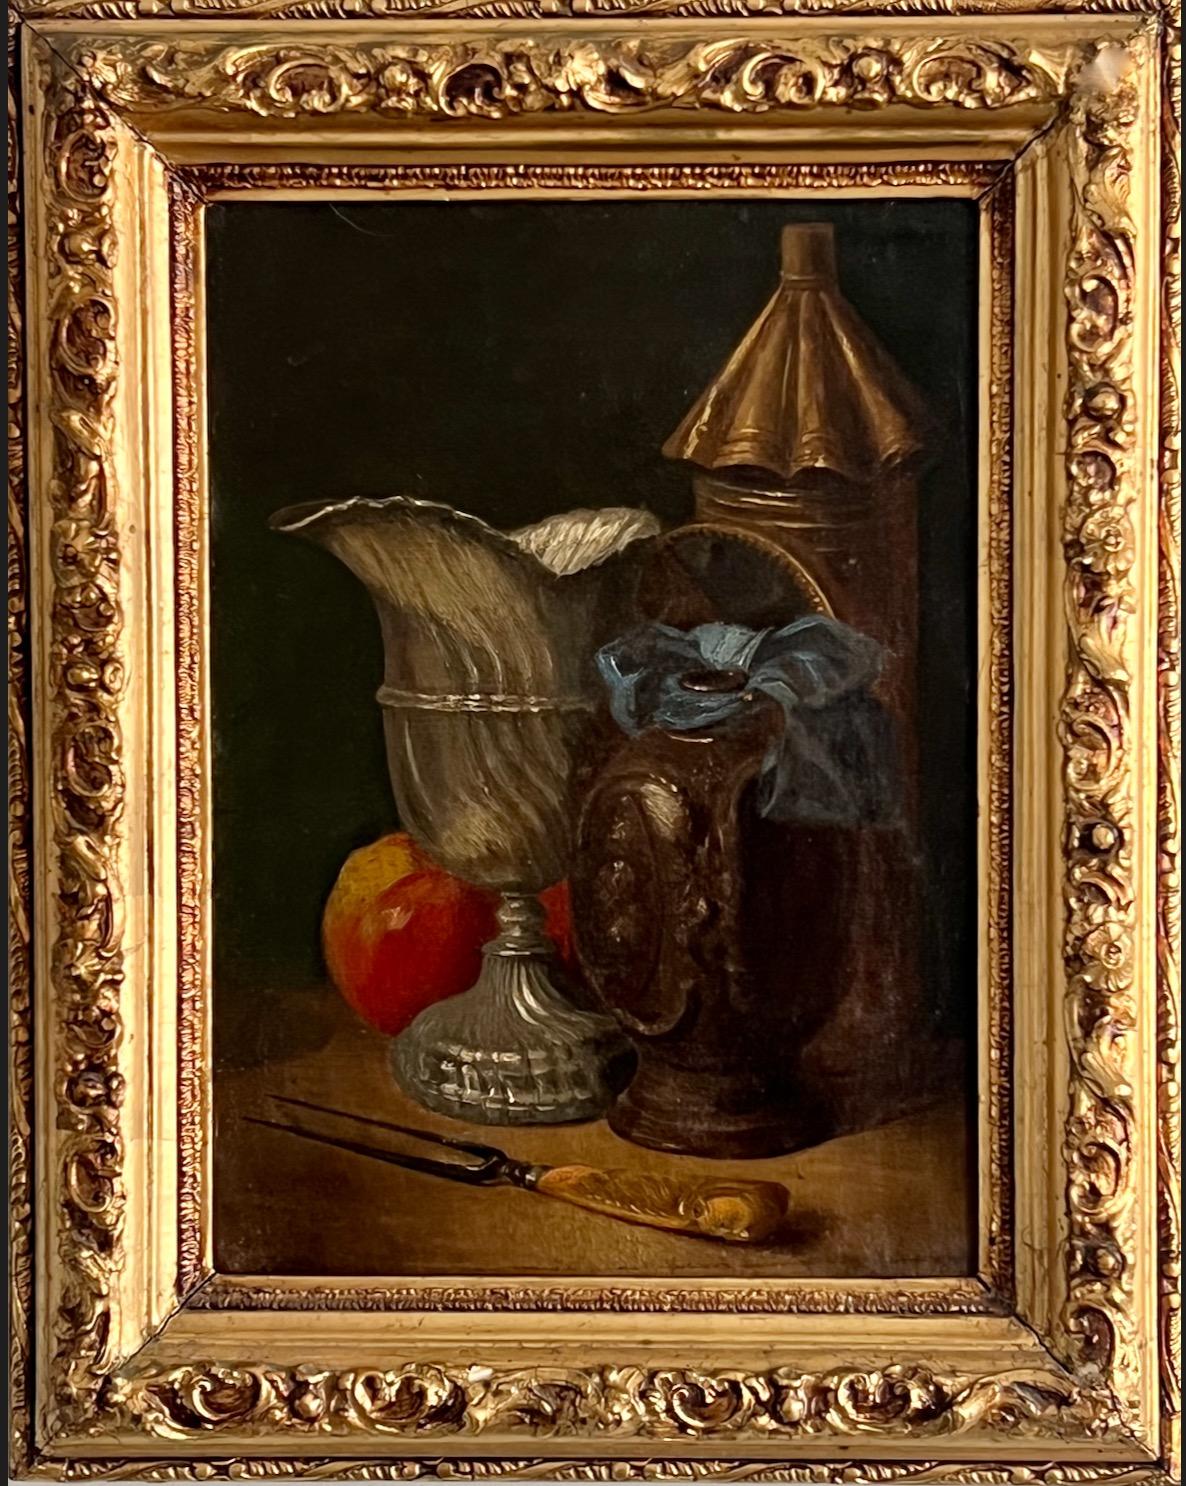 Unknown Still-Life Painting - 19th Century Still-Life, A Lantern, Tankard, Wine Ewer, Apple and a Fork